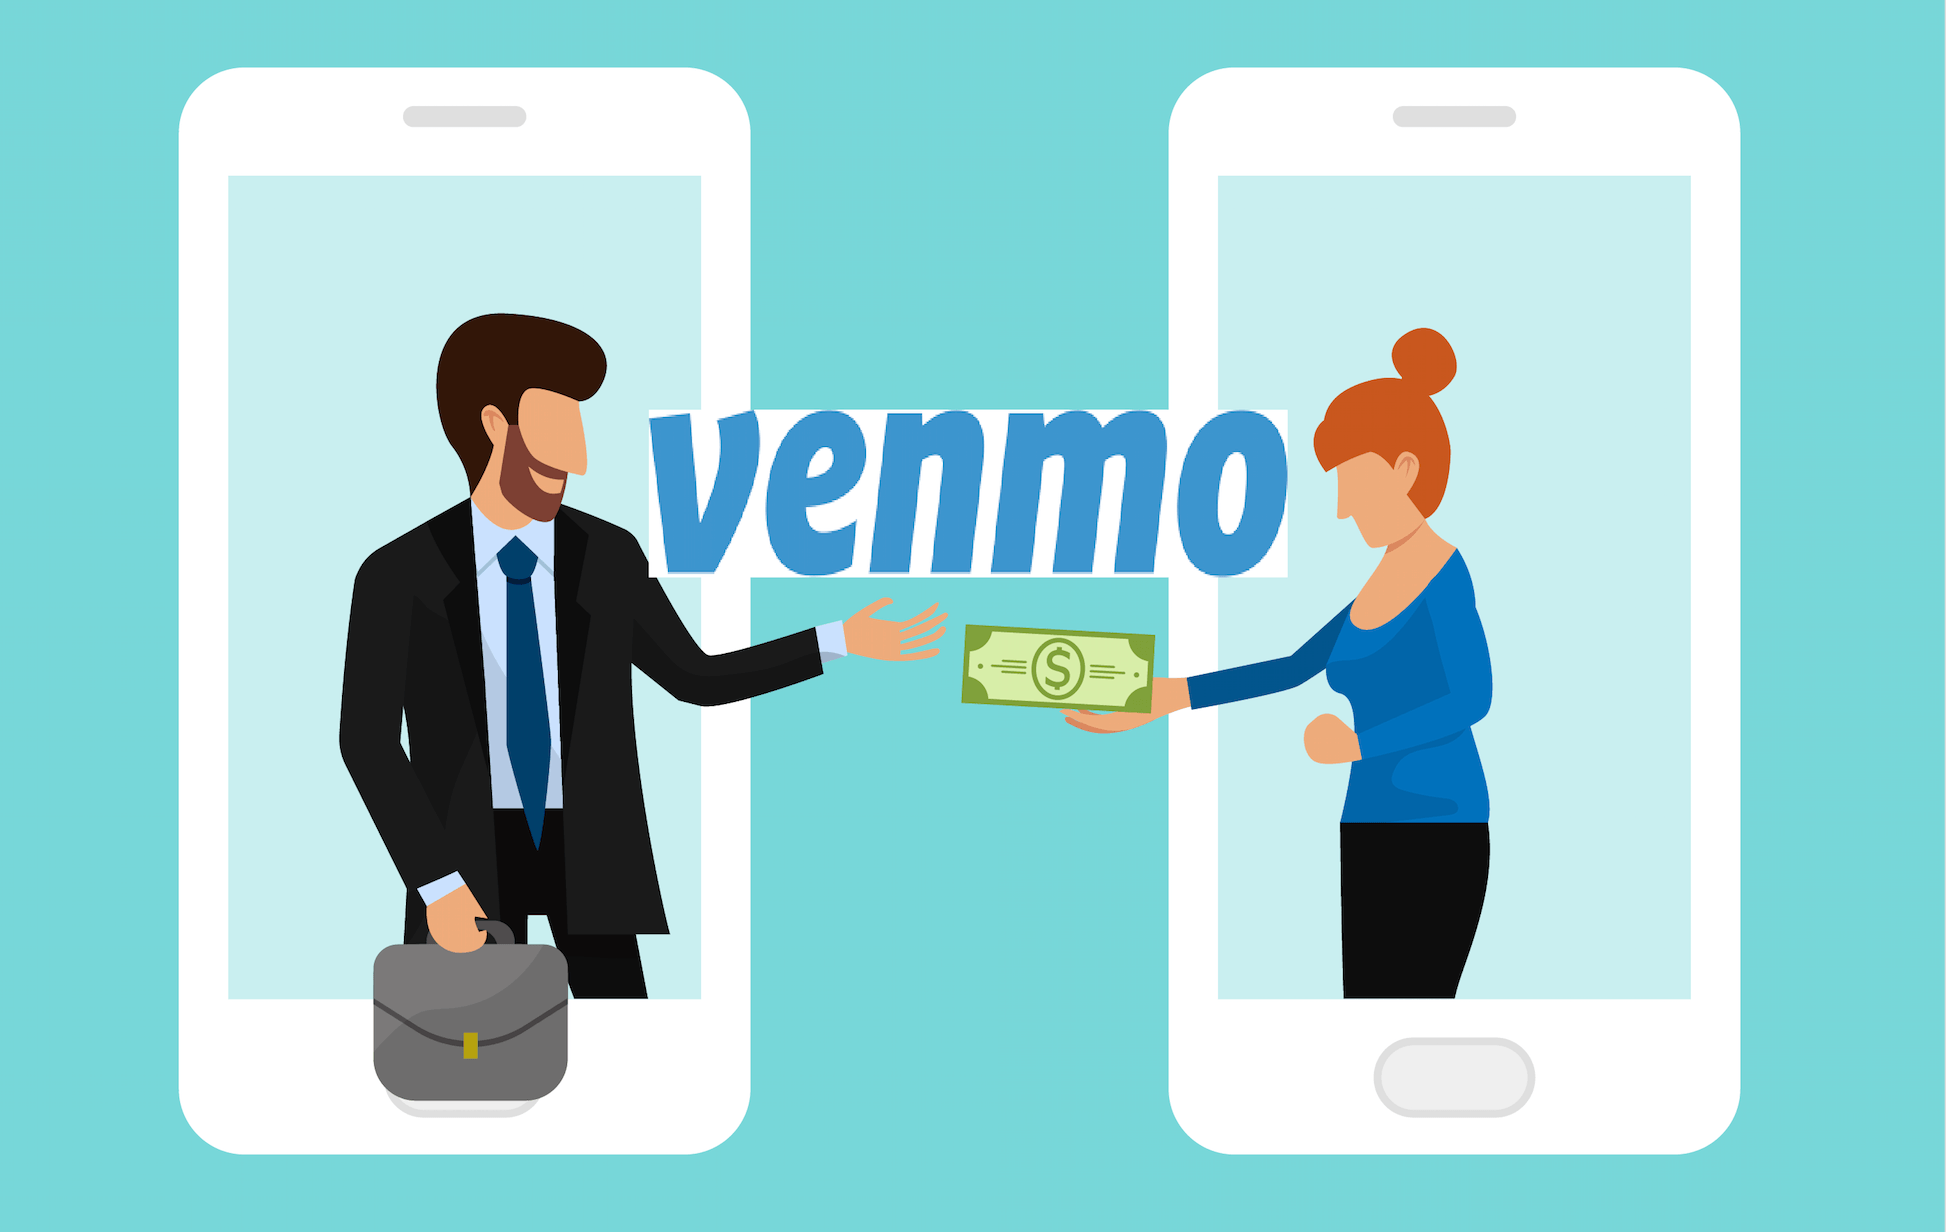 Why Use the Venmo App? It Is More than Just a Way to Pay Friends